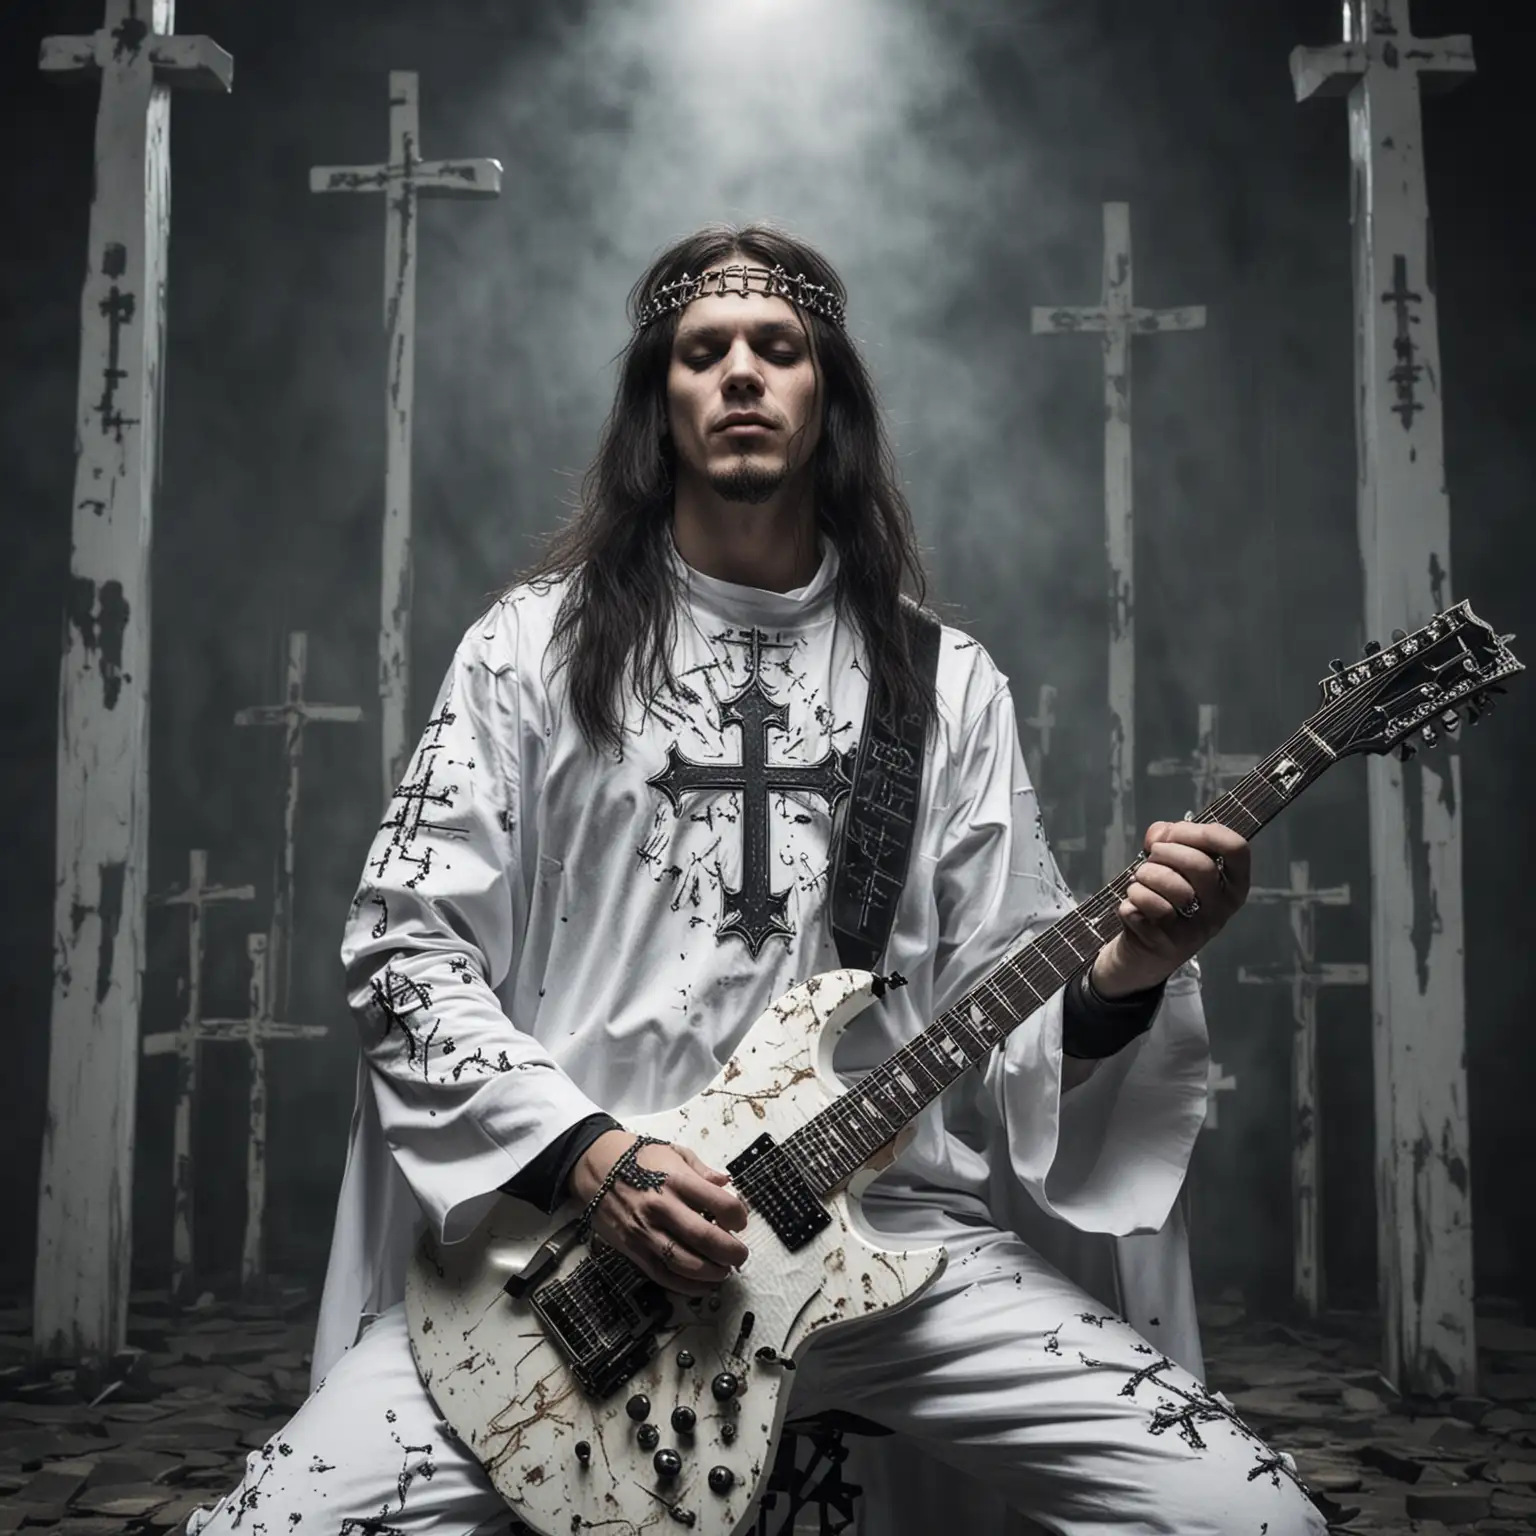 Metal Guitarist in White with Christian Crosses